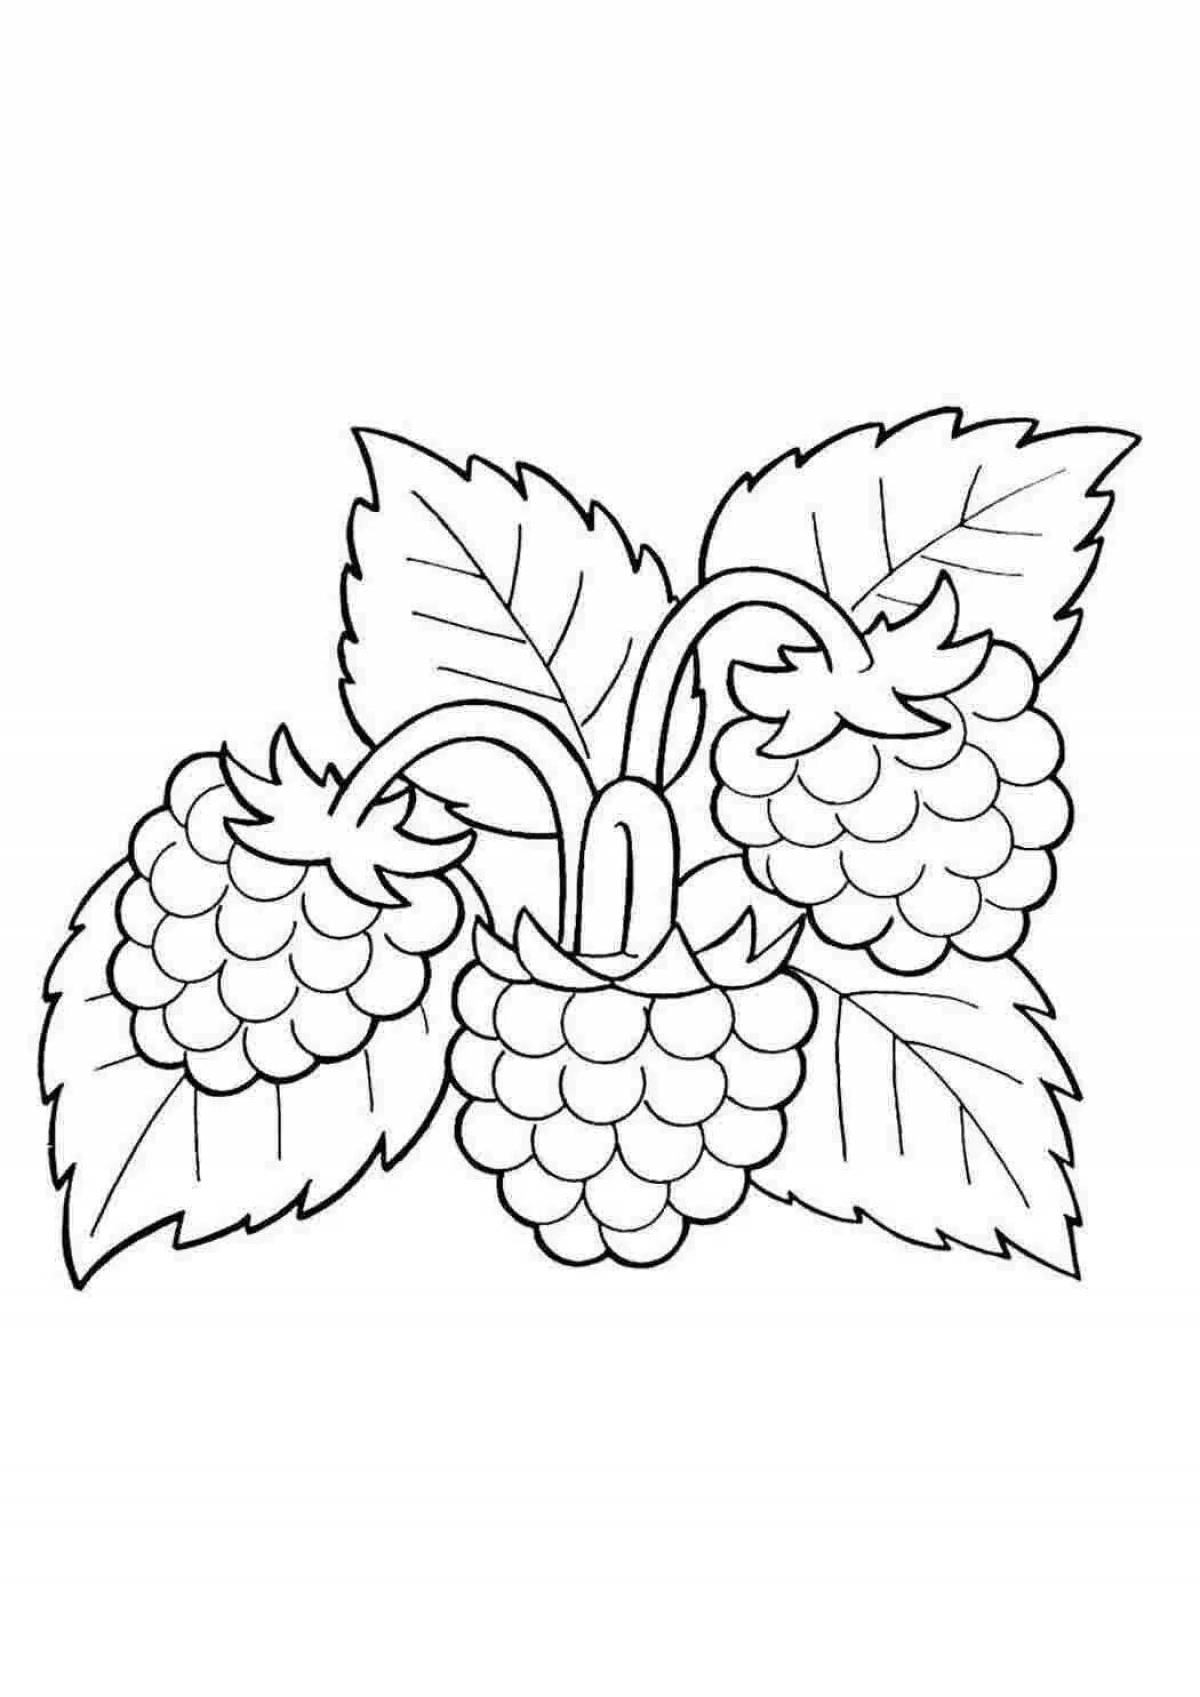 Sparkling raspberry coloring page